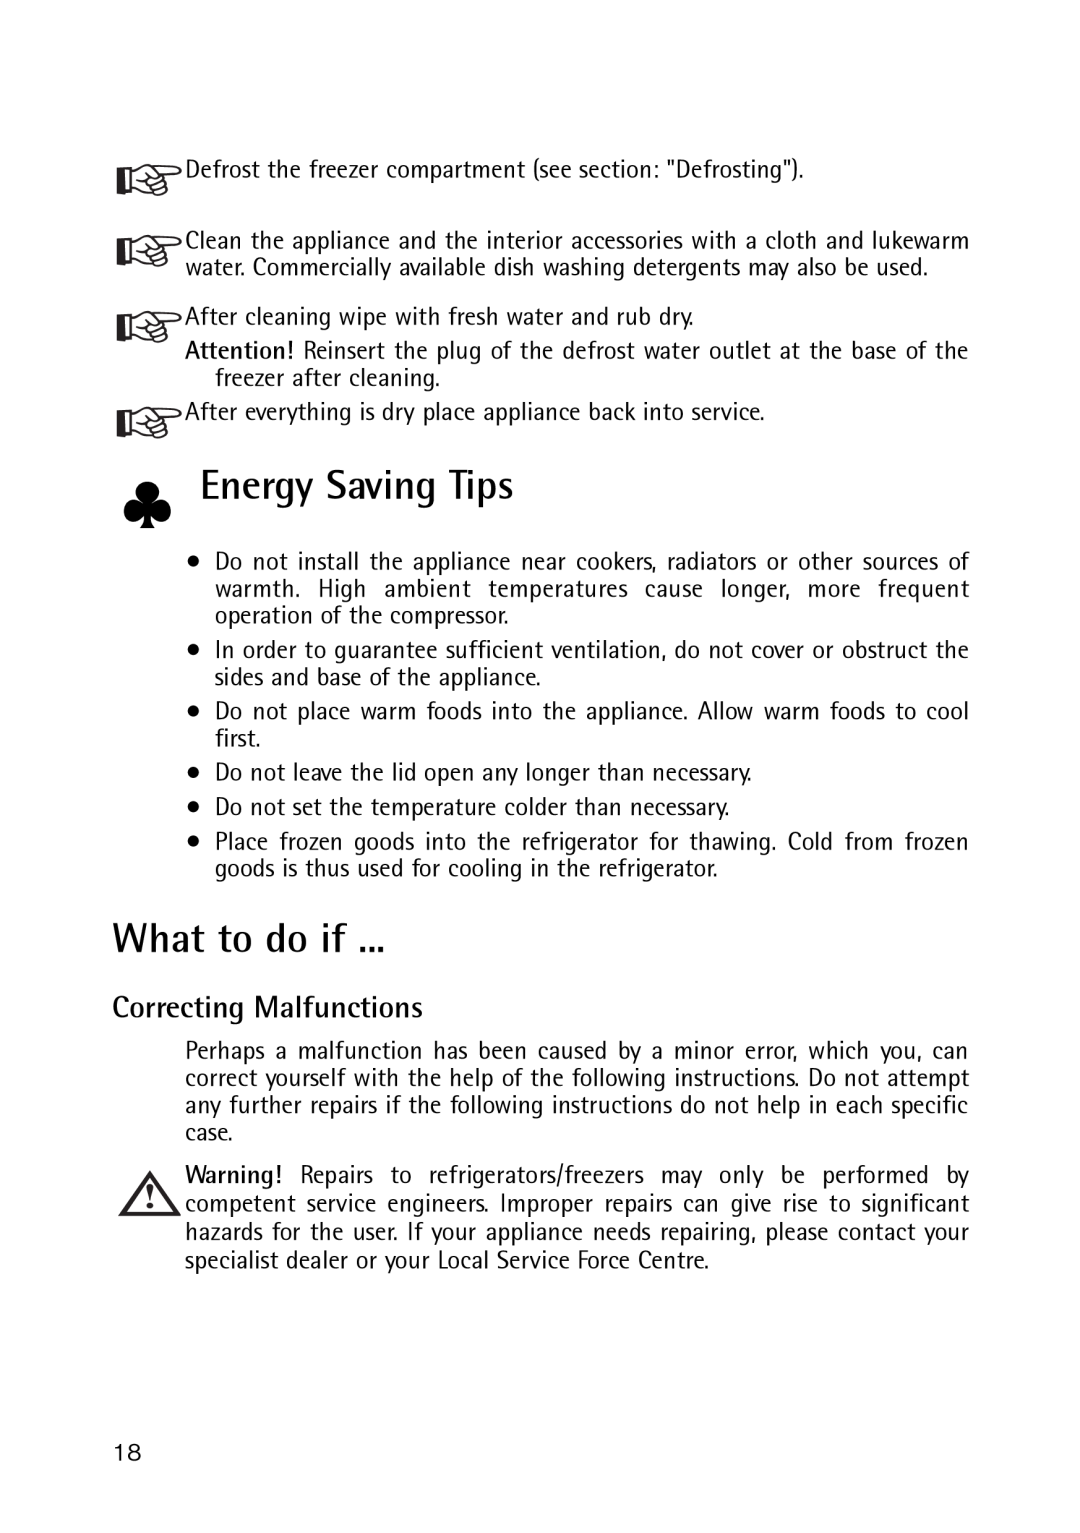 Electrolux 189 GT, 261 GT operating instructions Energy Saving Tips, What to do if, Correcting Malfunctions 